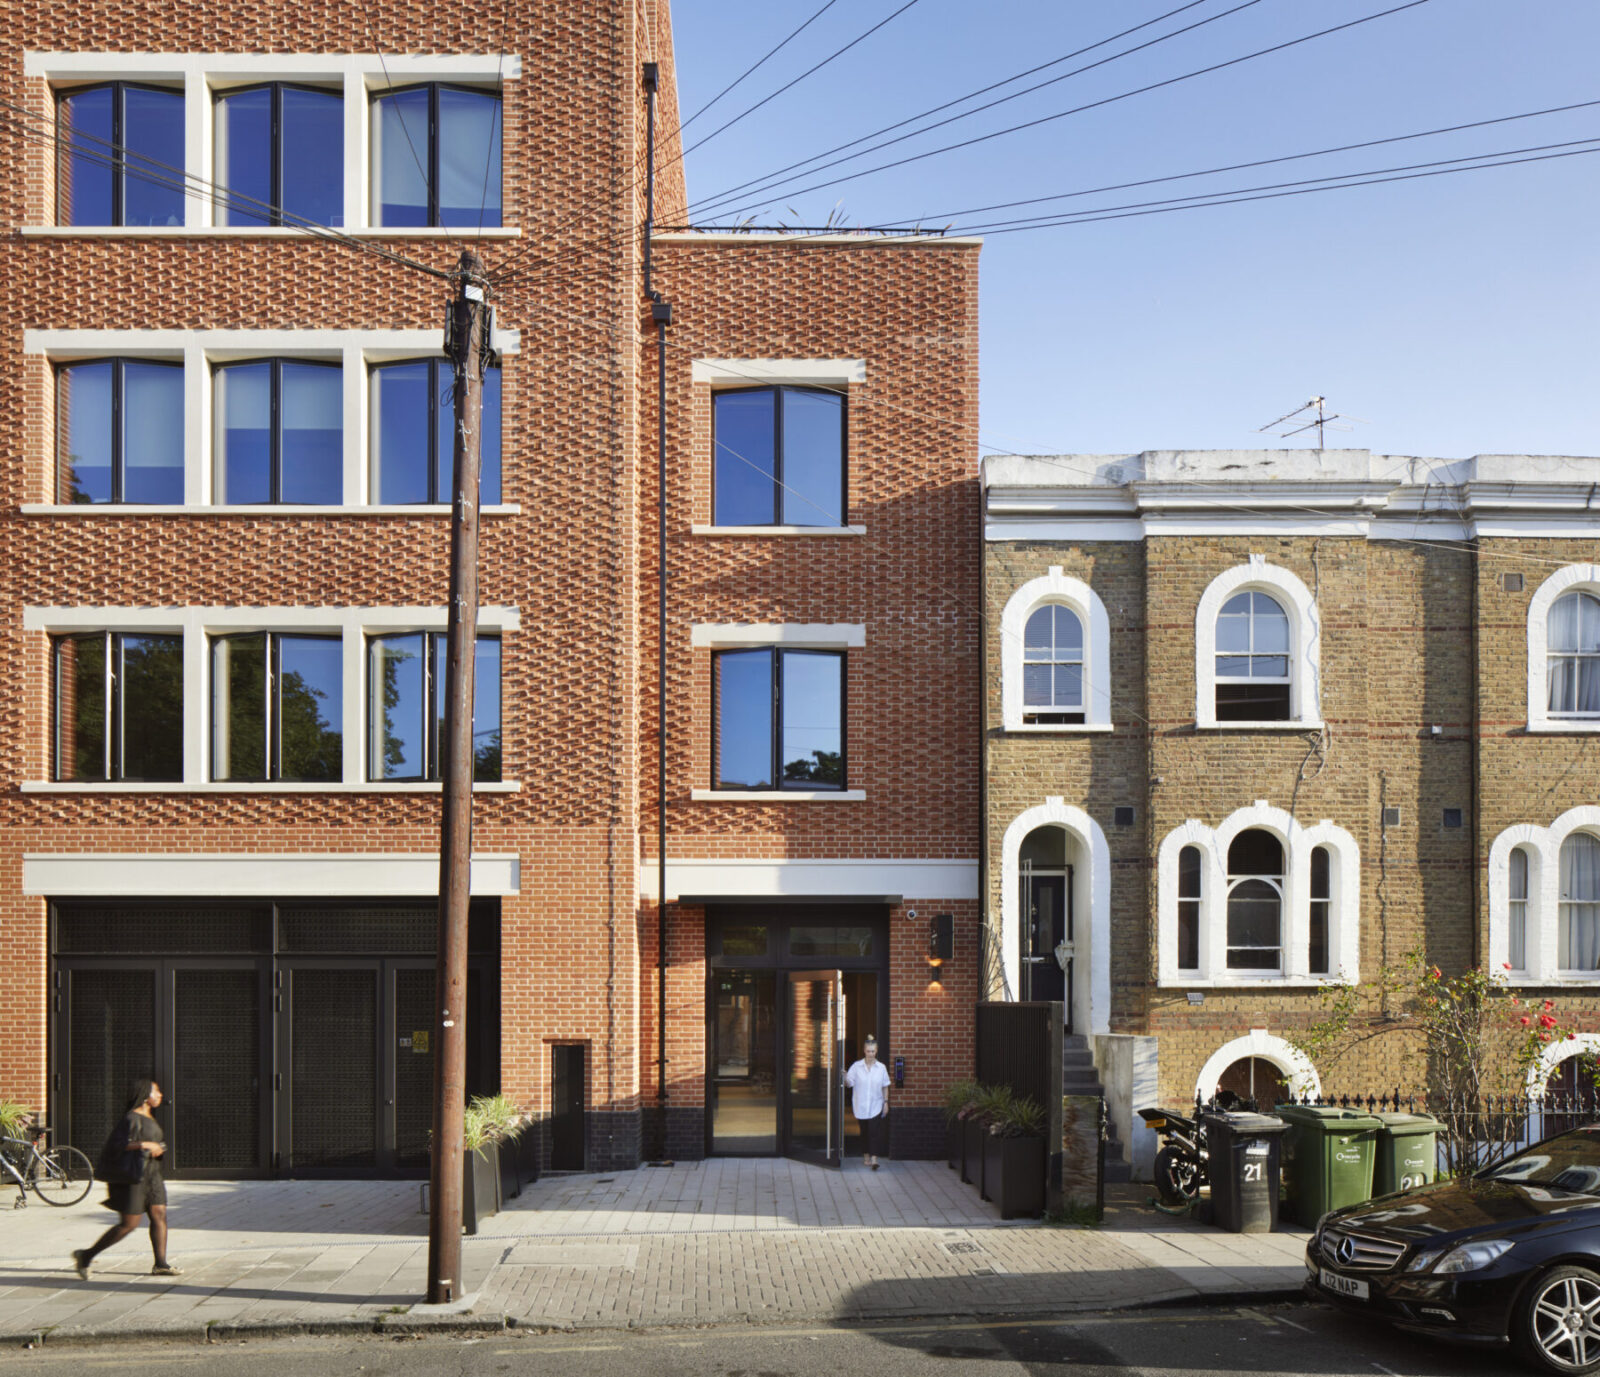 Archisearch Squire & Partners has launched The Department Store Studios, a new local workspace in Brixton